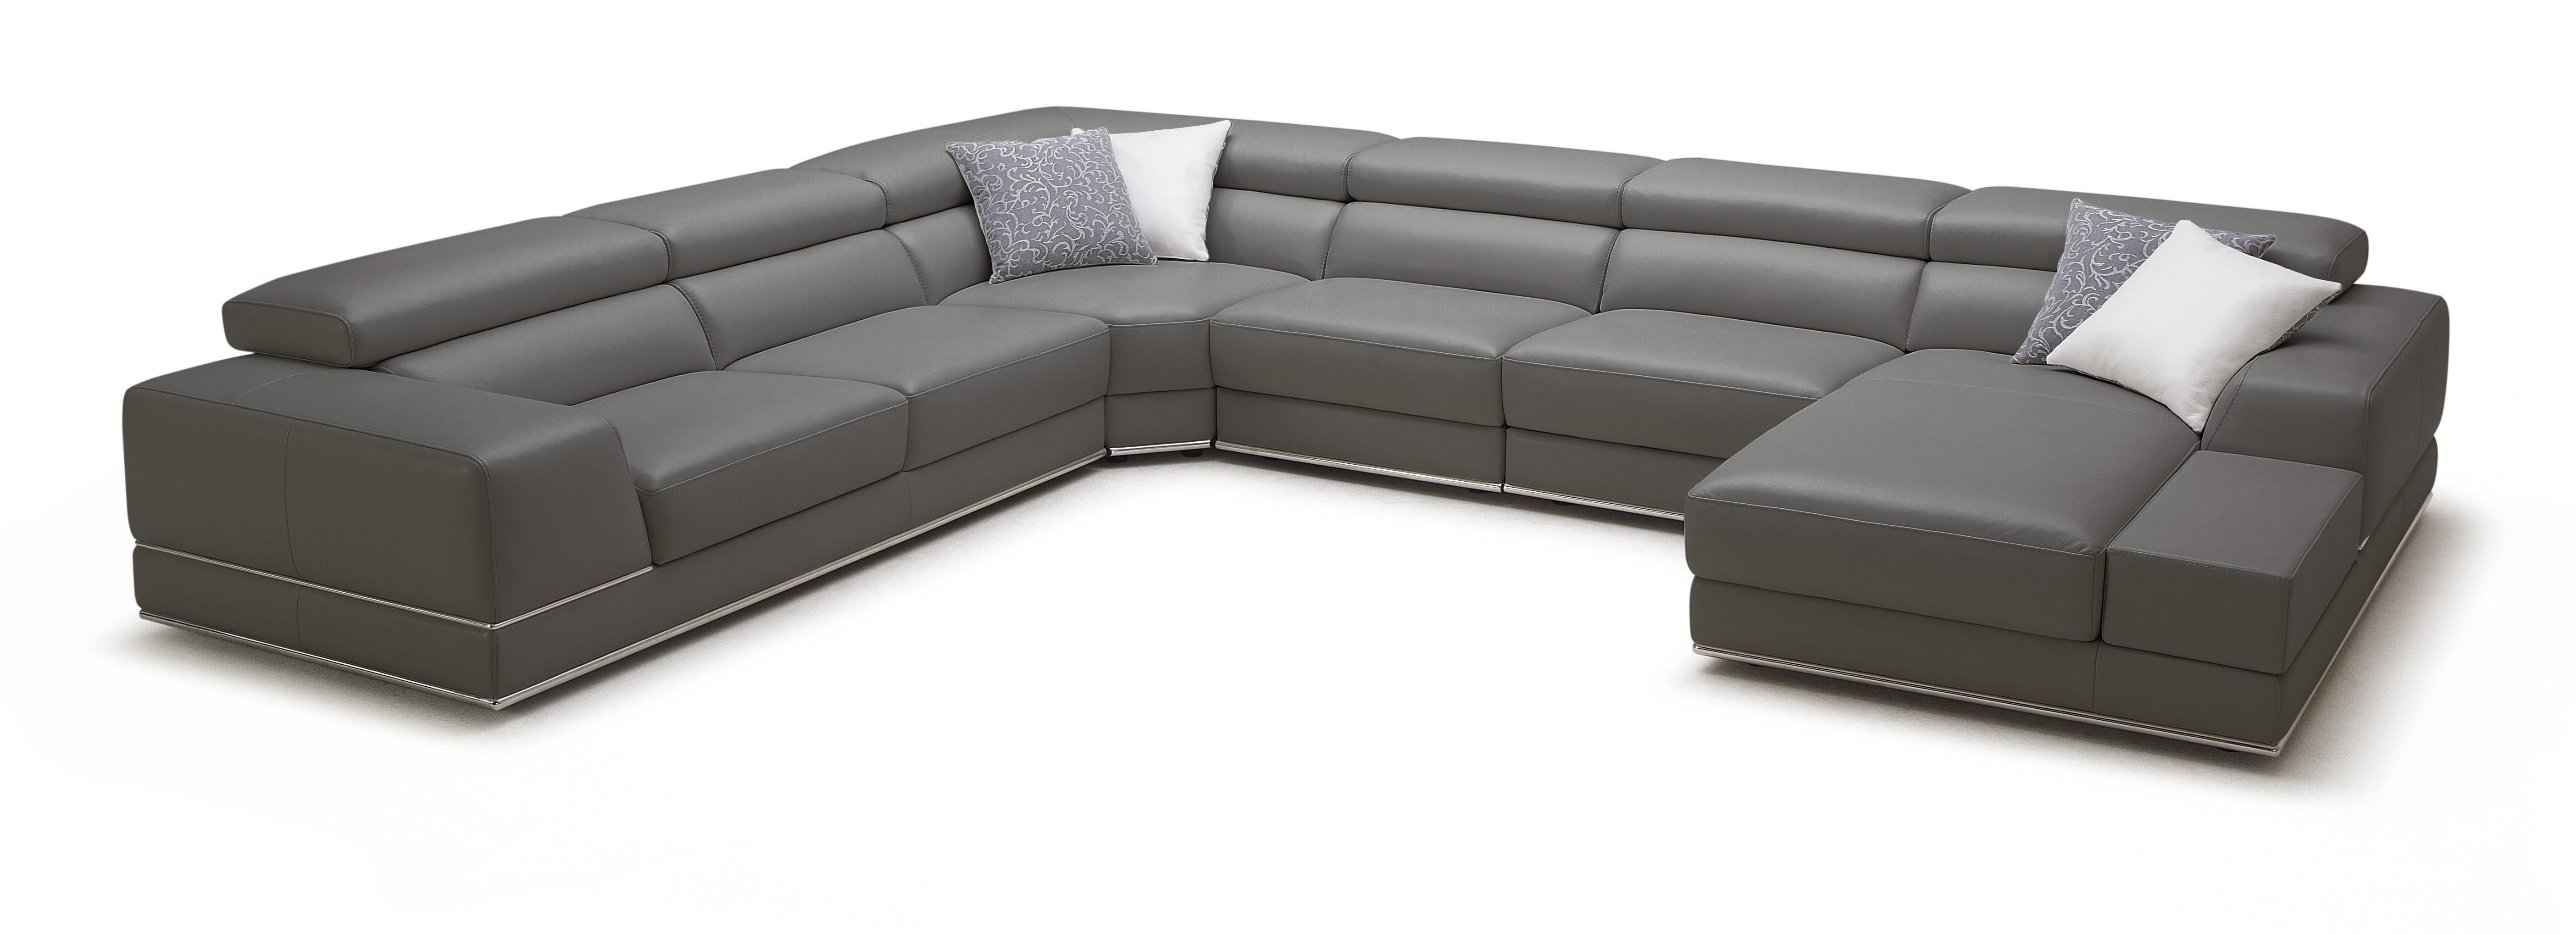 leather extended sofa set in hyderabad